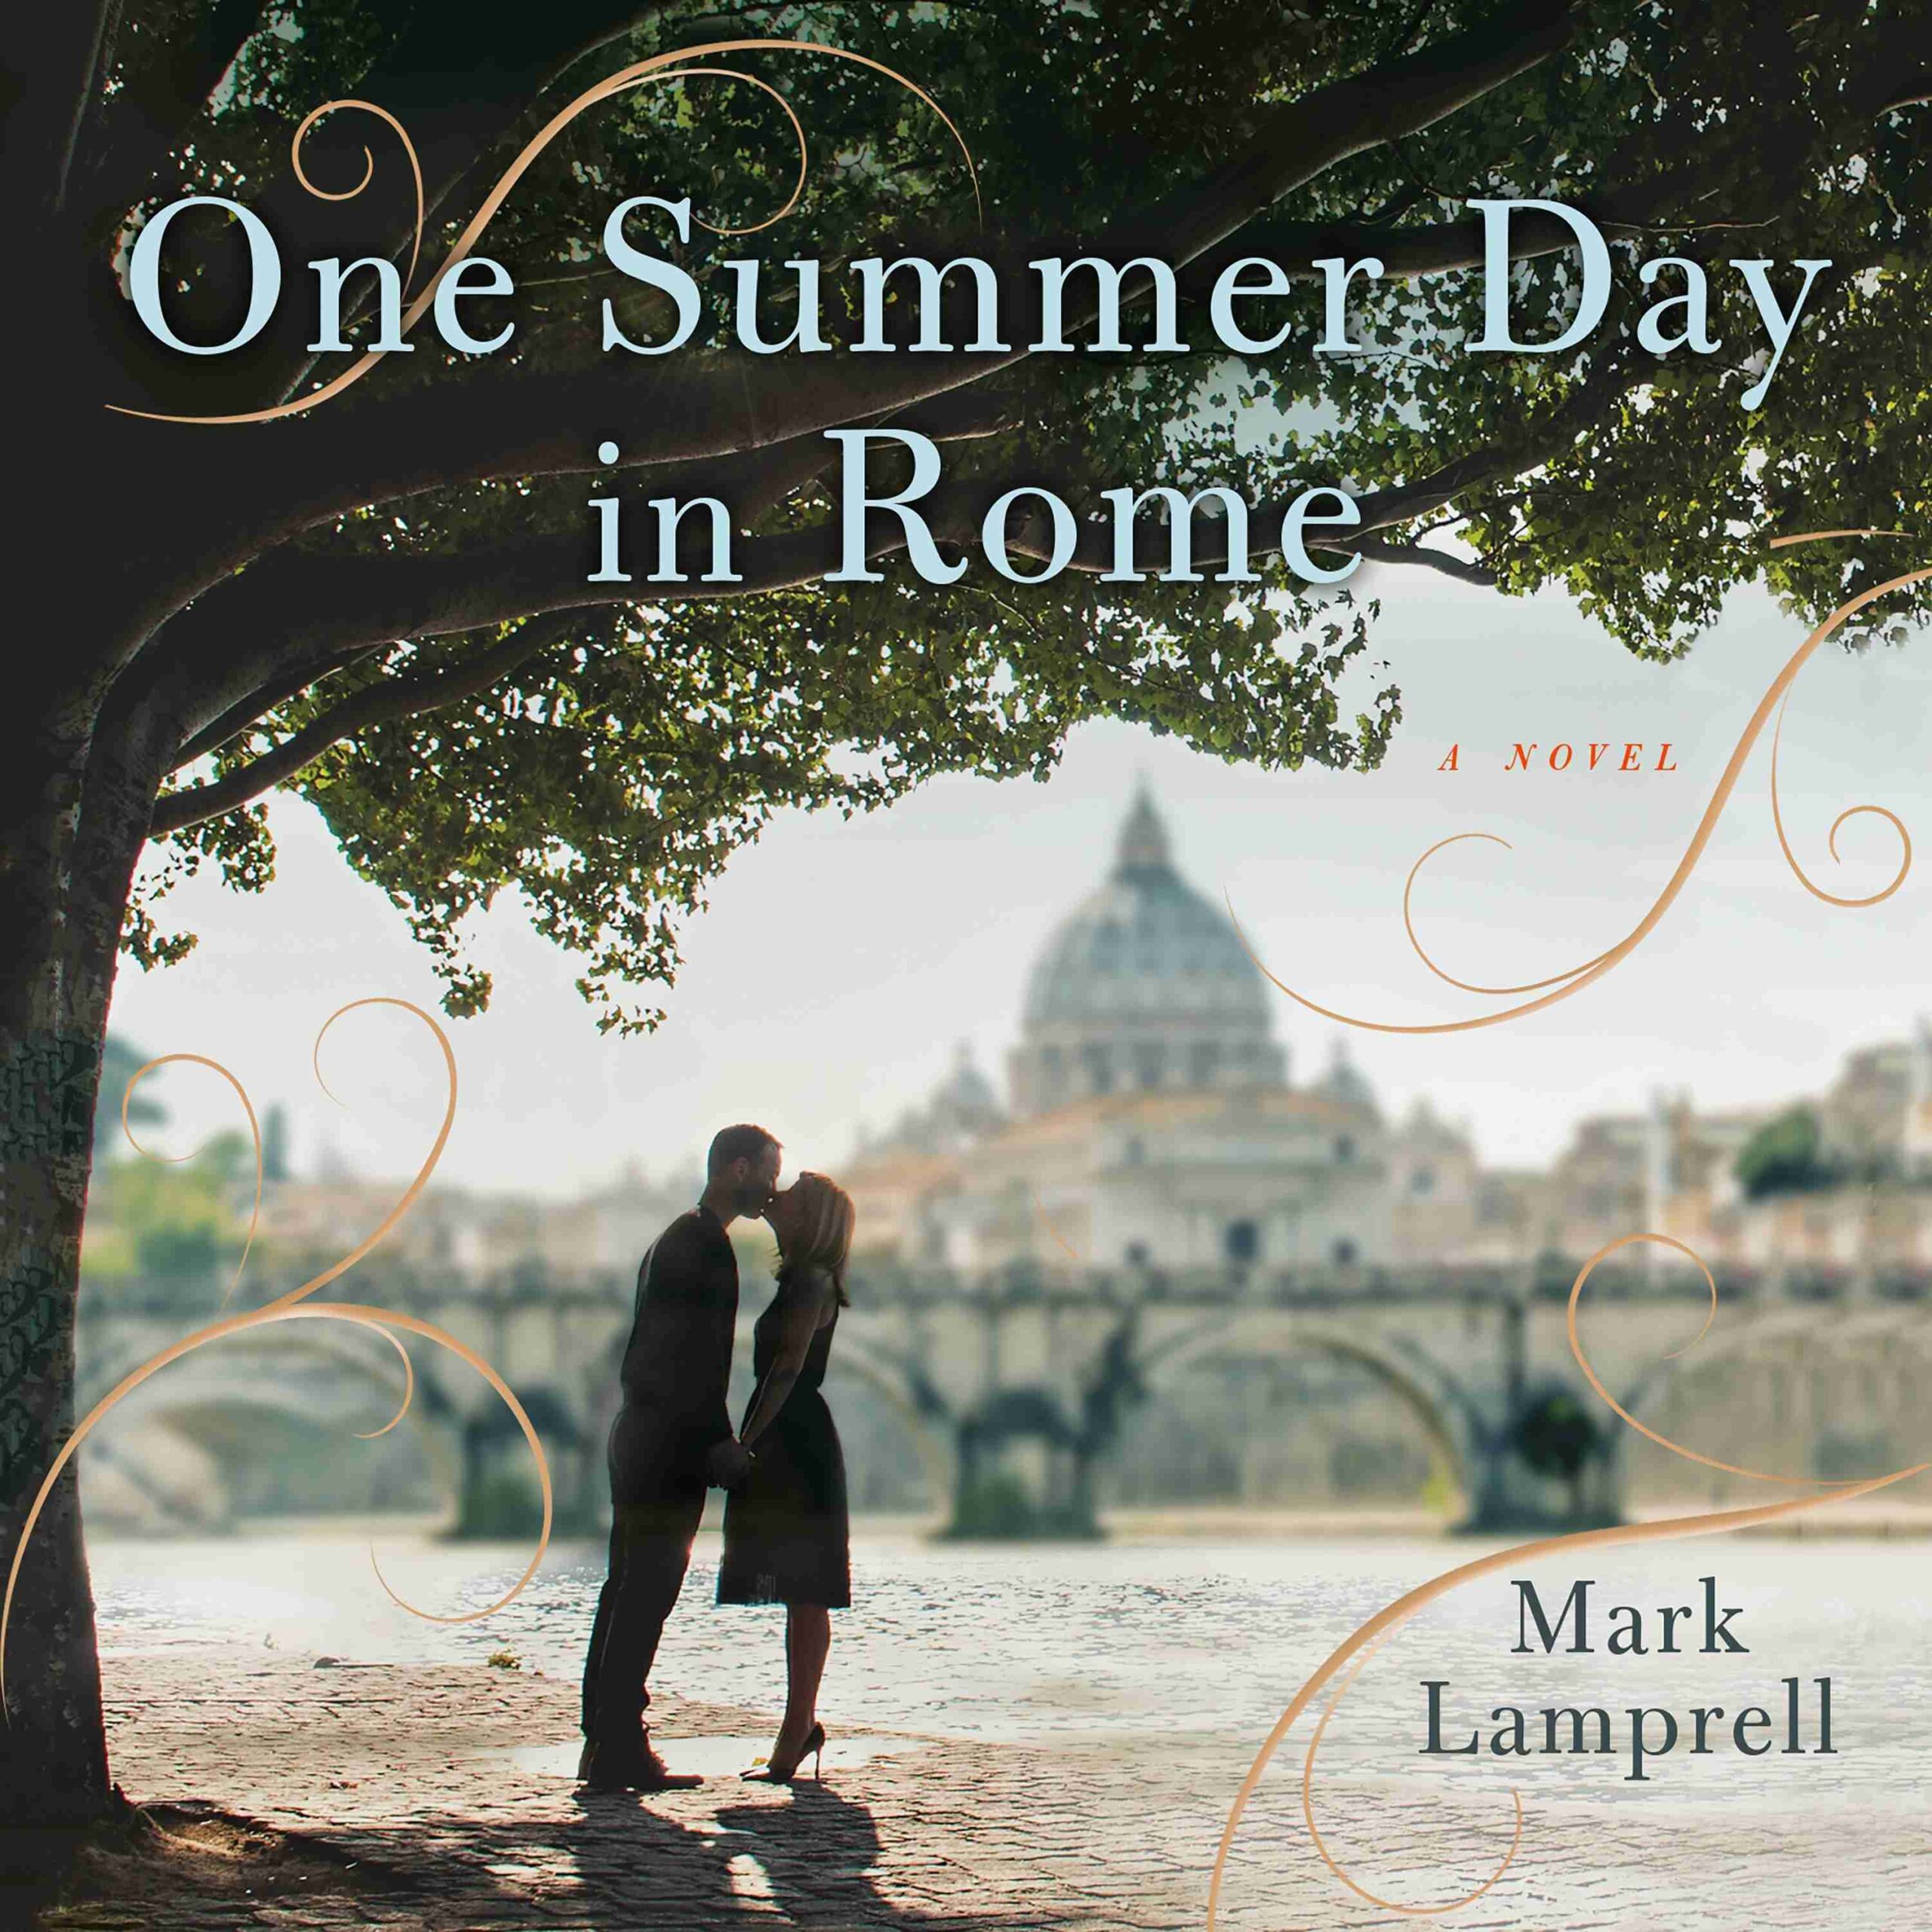 One Summer Day in Rome byMark Lamprell Audiobook. 19.99 USD